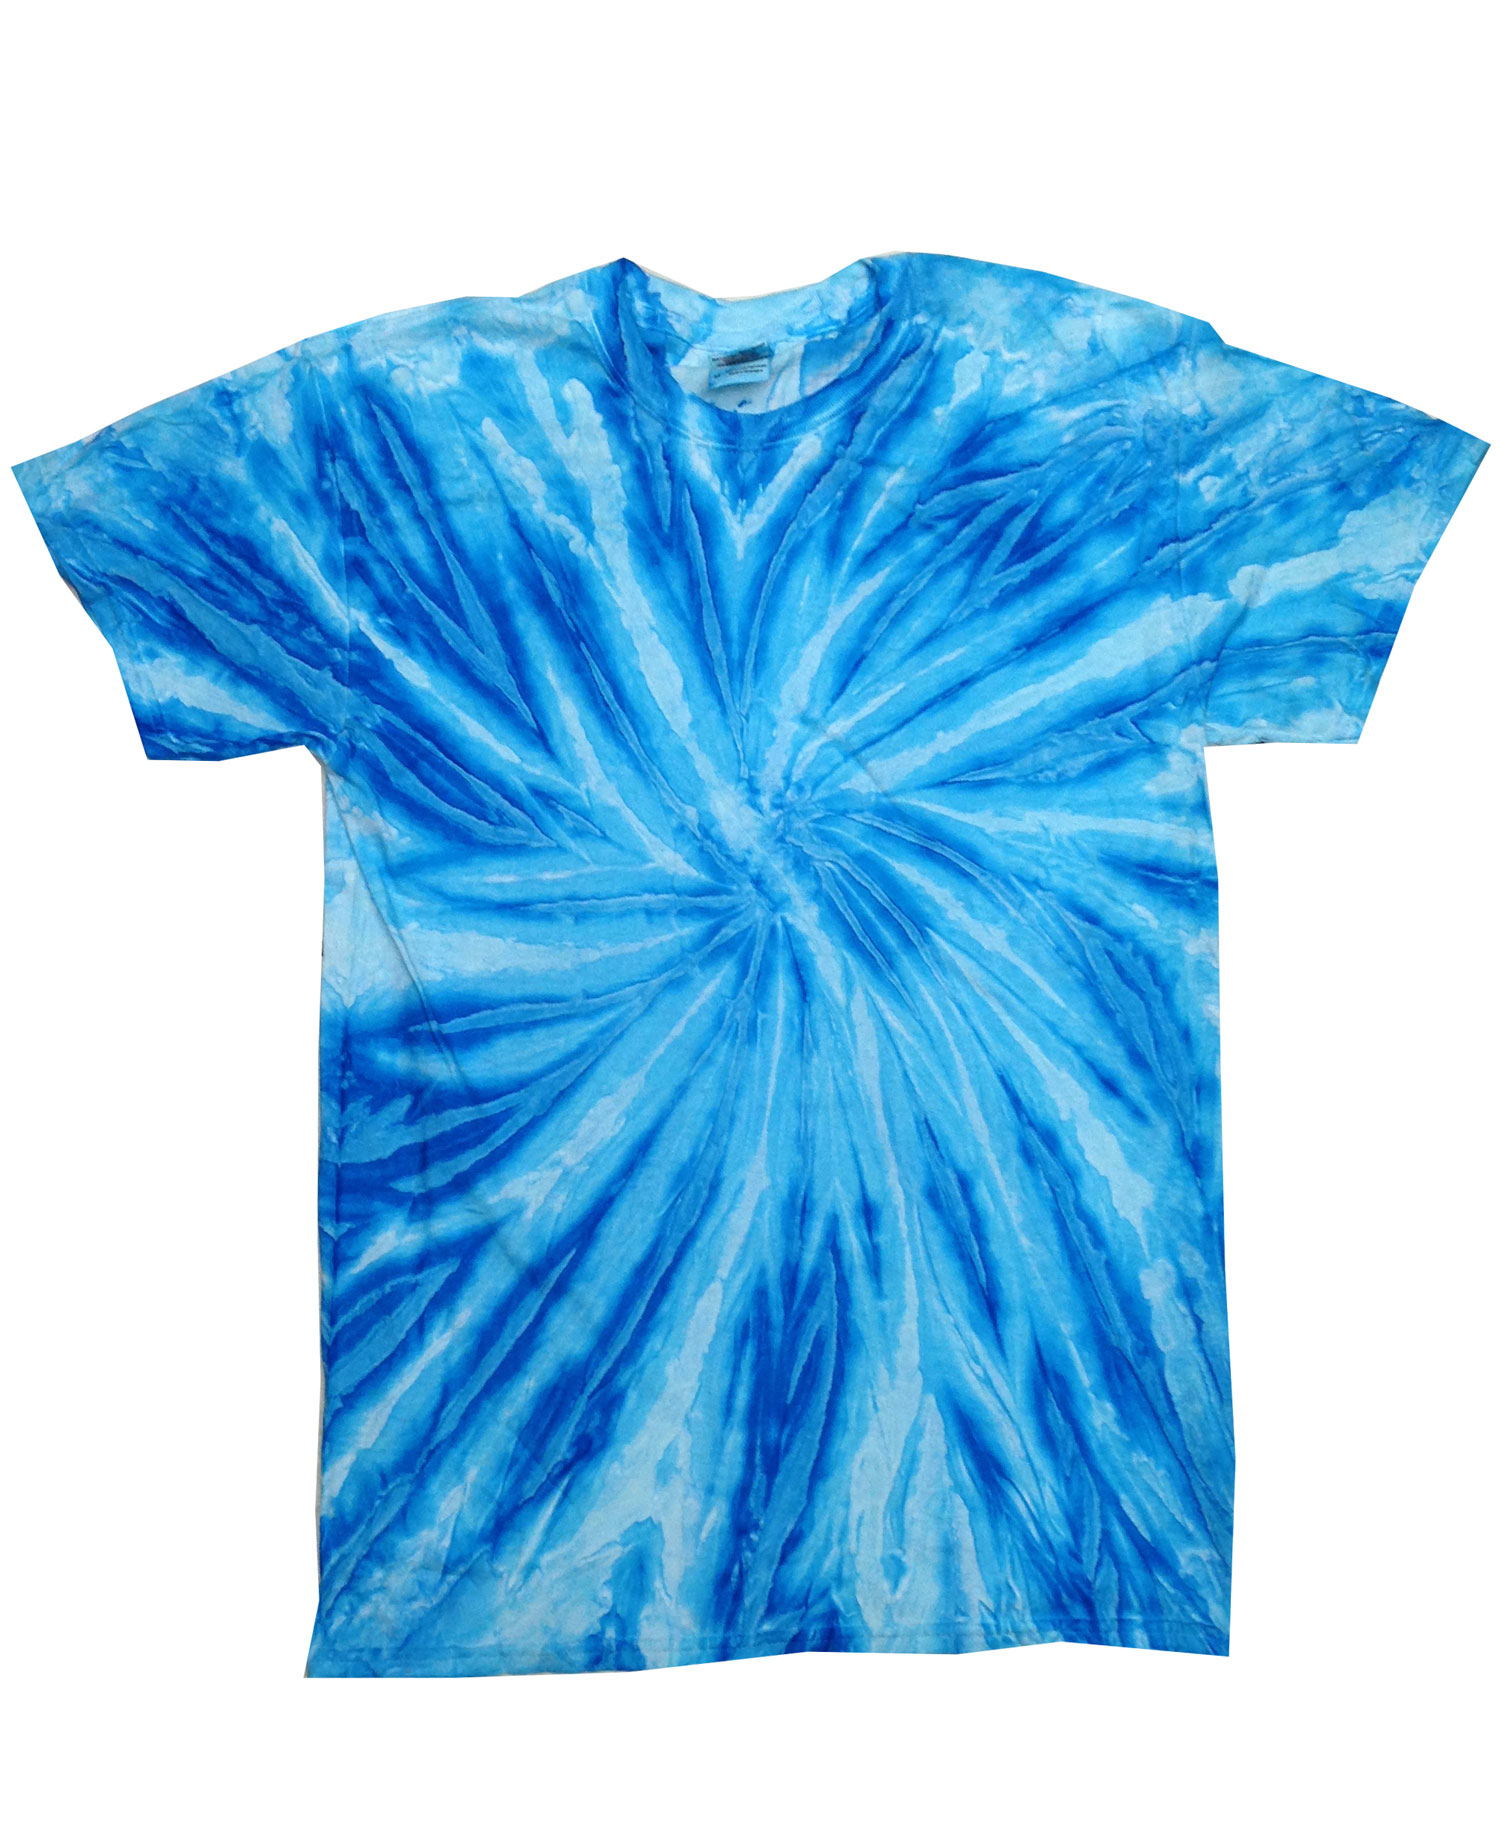 Colortone T1100Y - Twist Tie Dye Youth Tee $6.73 - Youth's T-Shirts